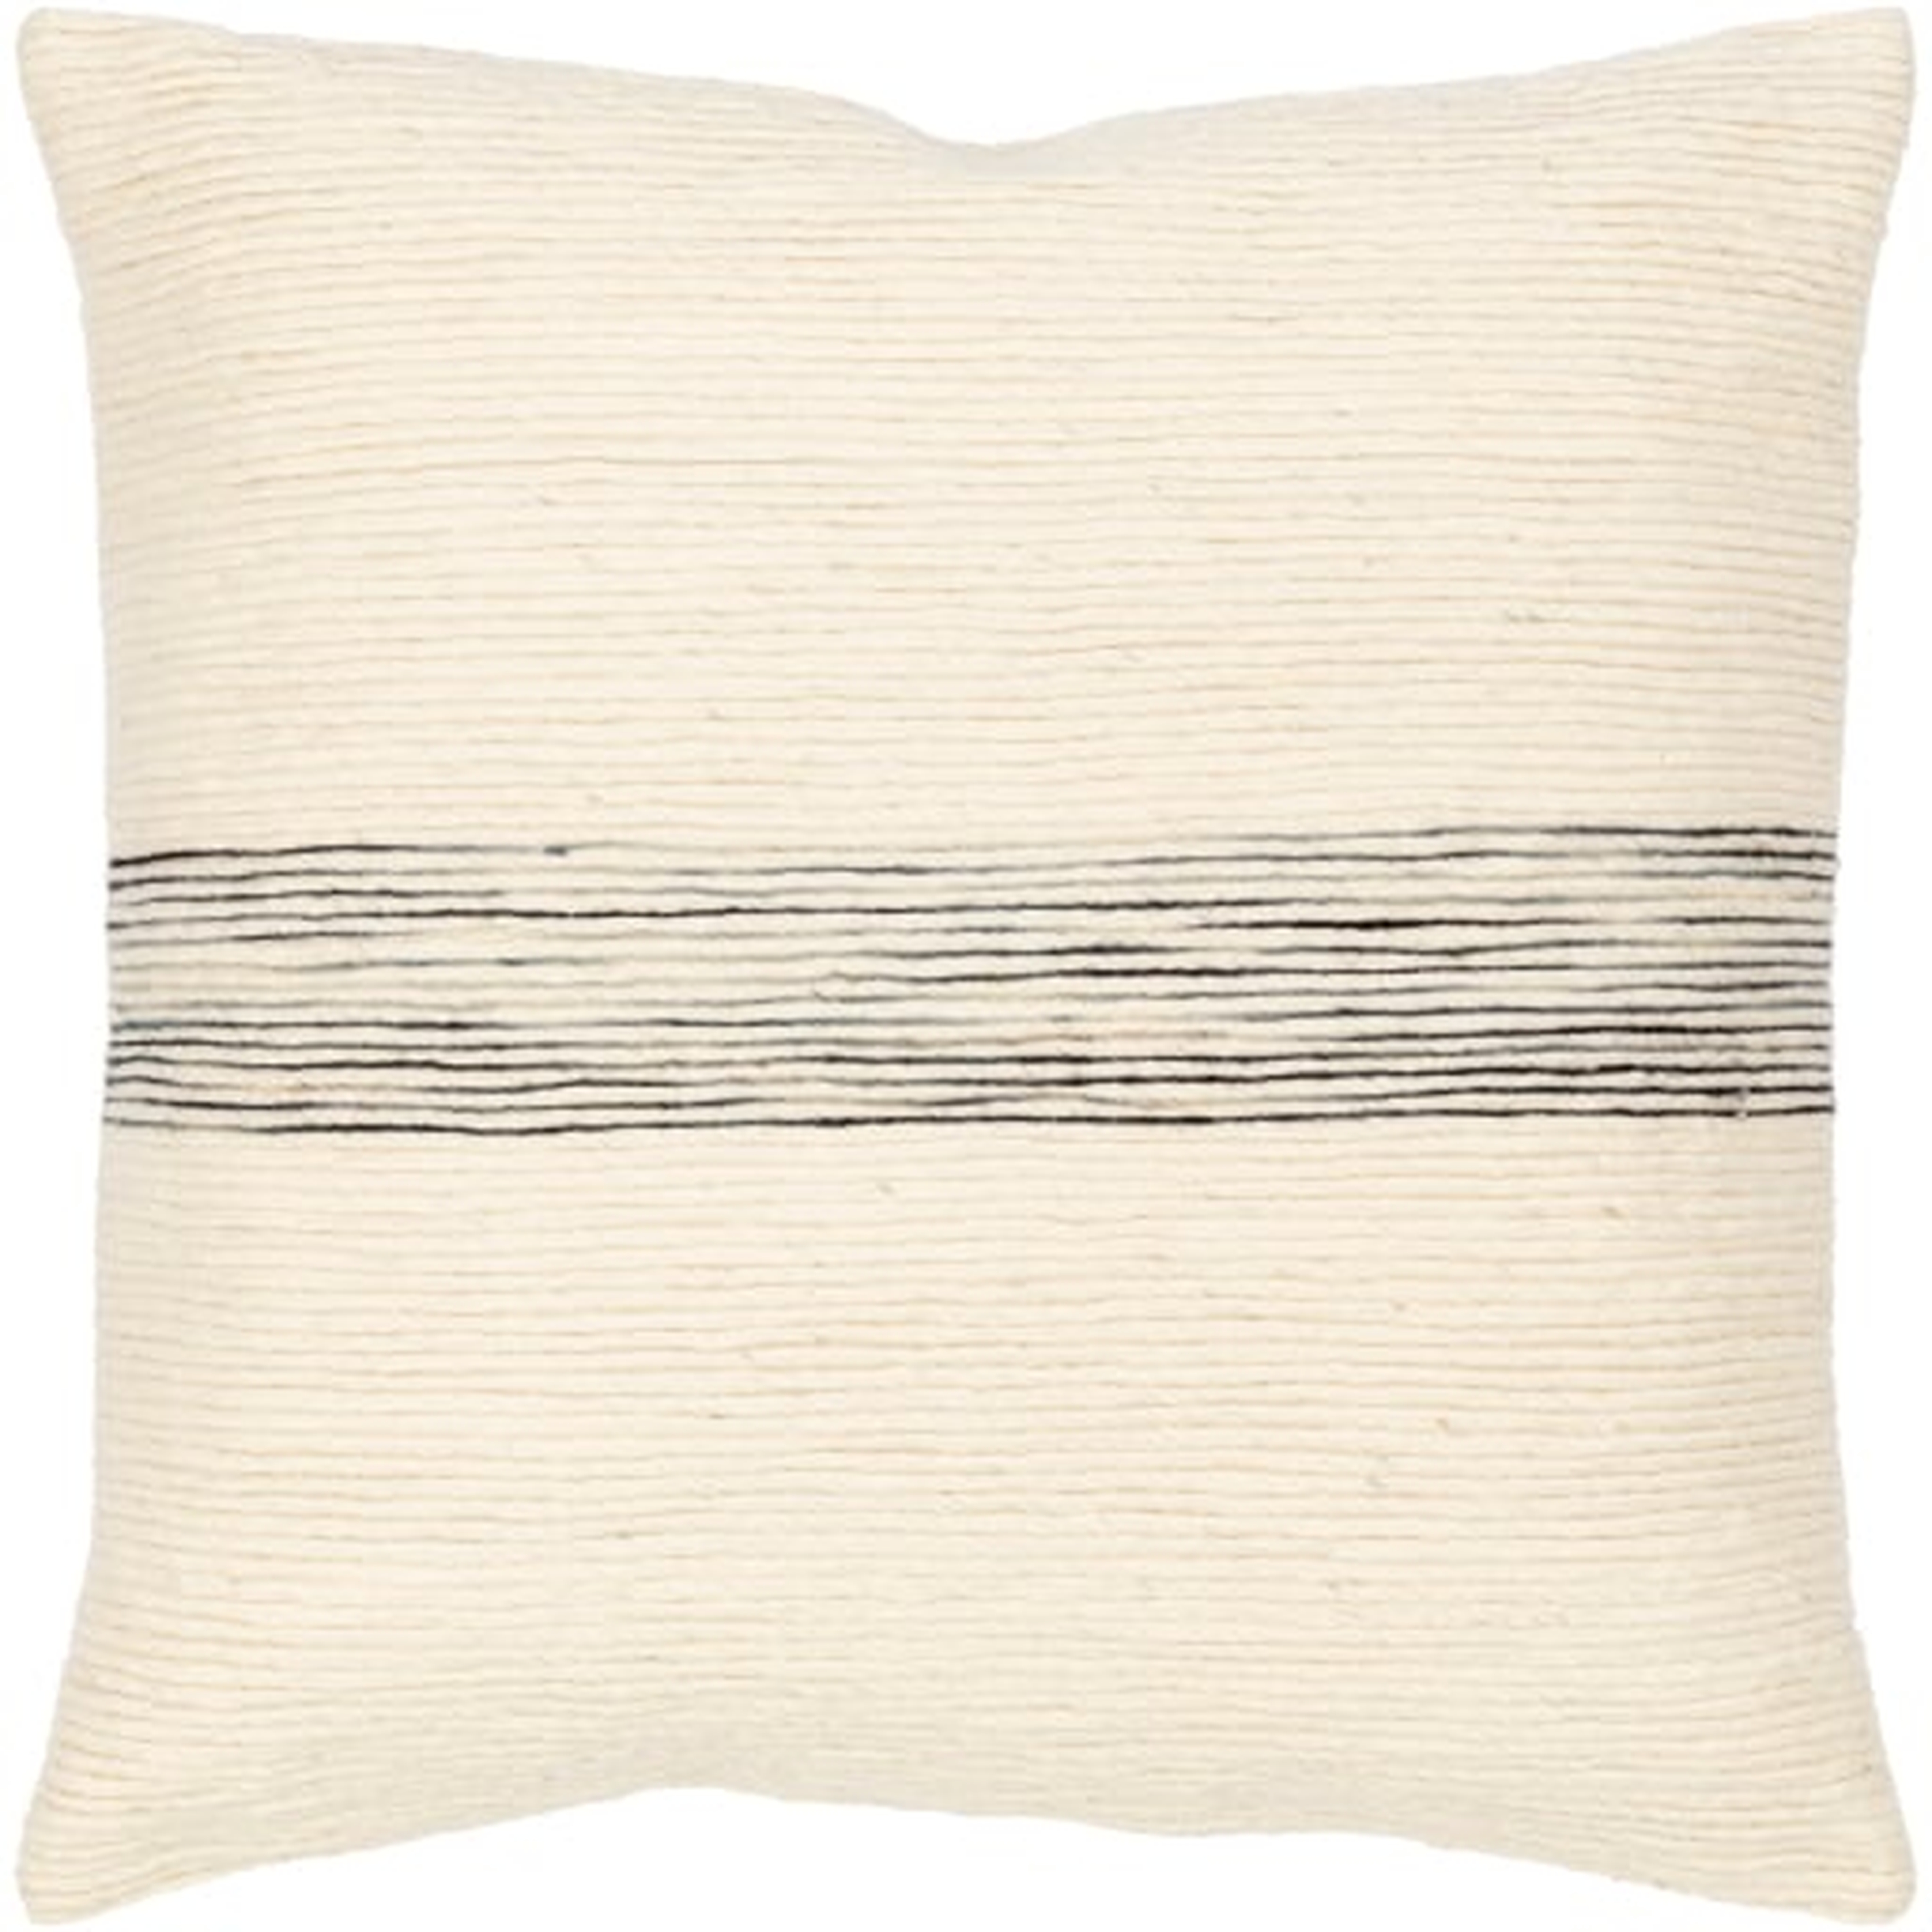 Carine Throw Pillow, 18" x 18", with poly insert - Surya